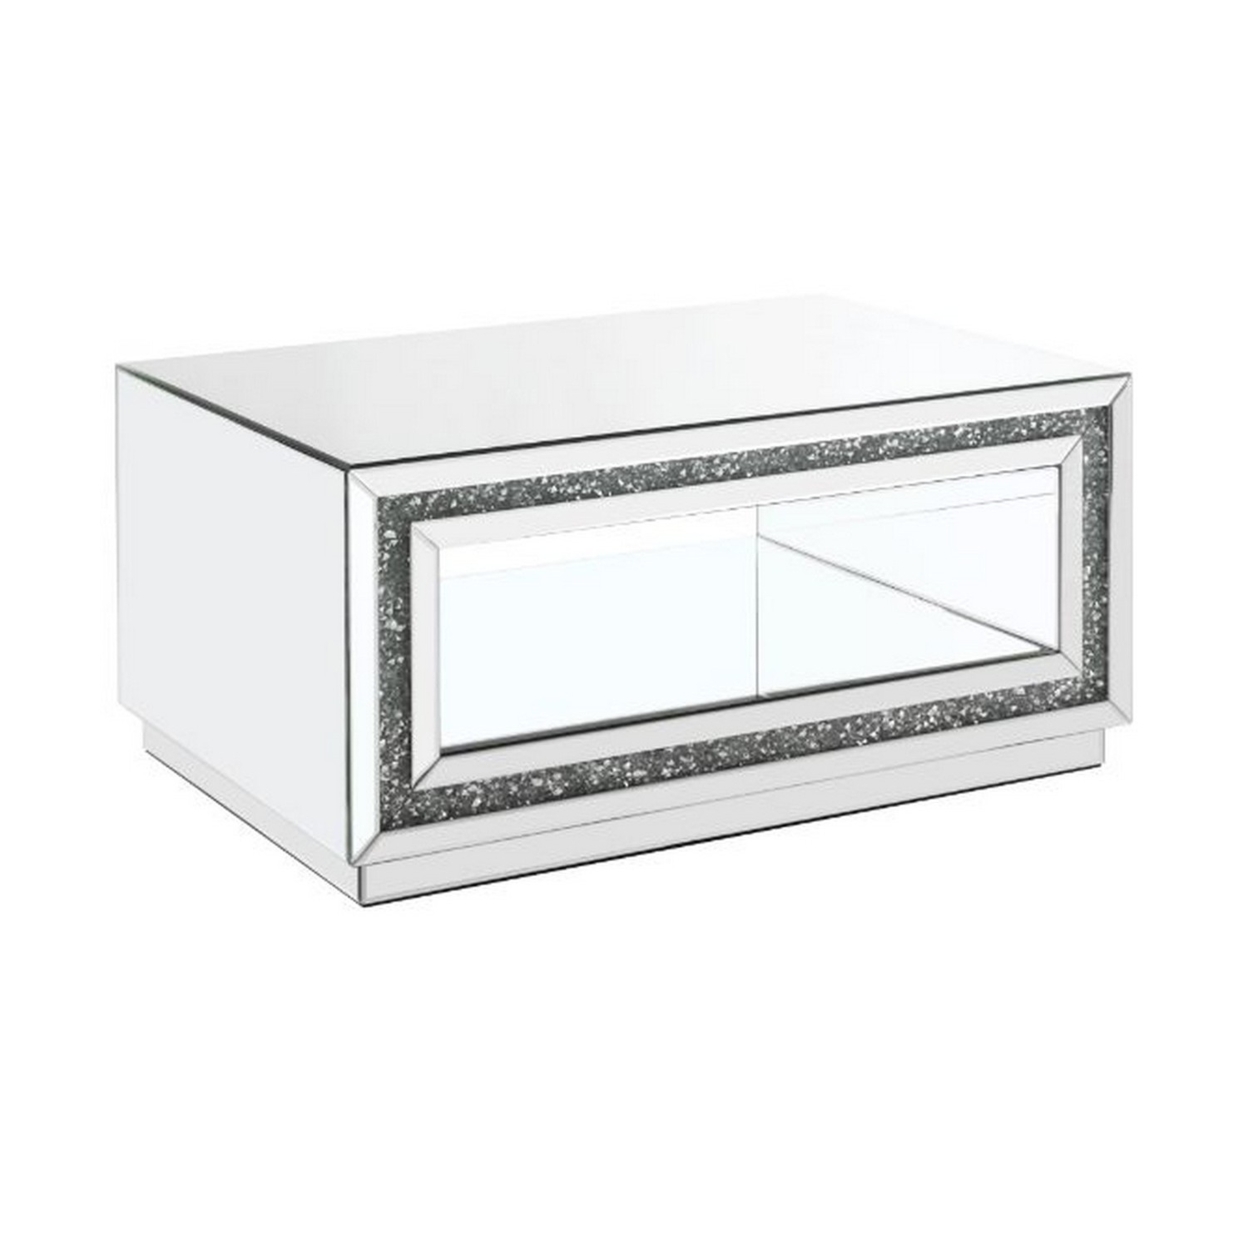 Coffee Table With Mirror Framing And Faux Diamonds, Silver- Saltoro Sherpi